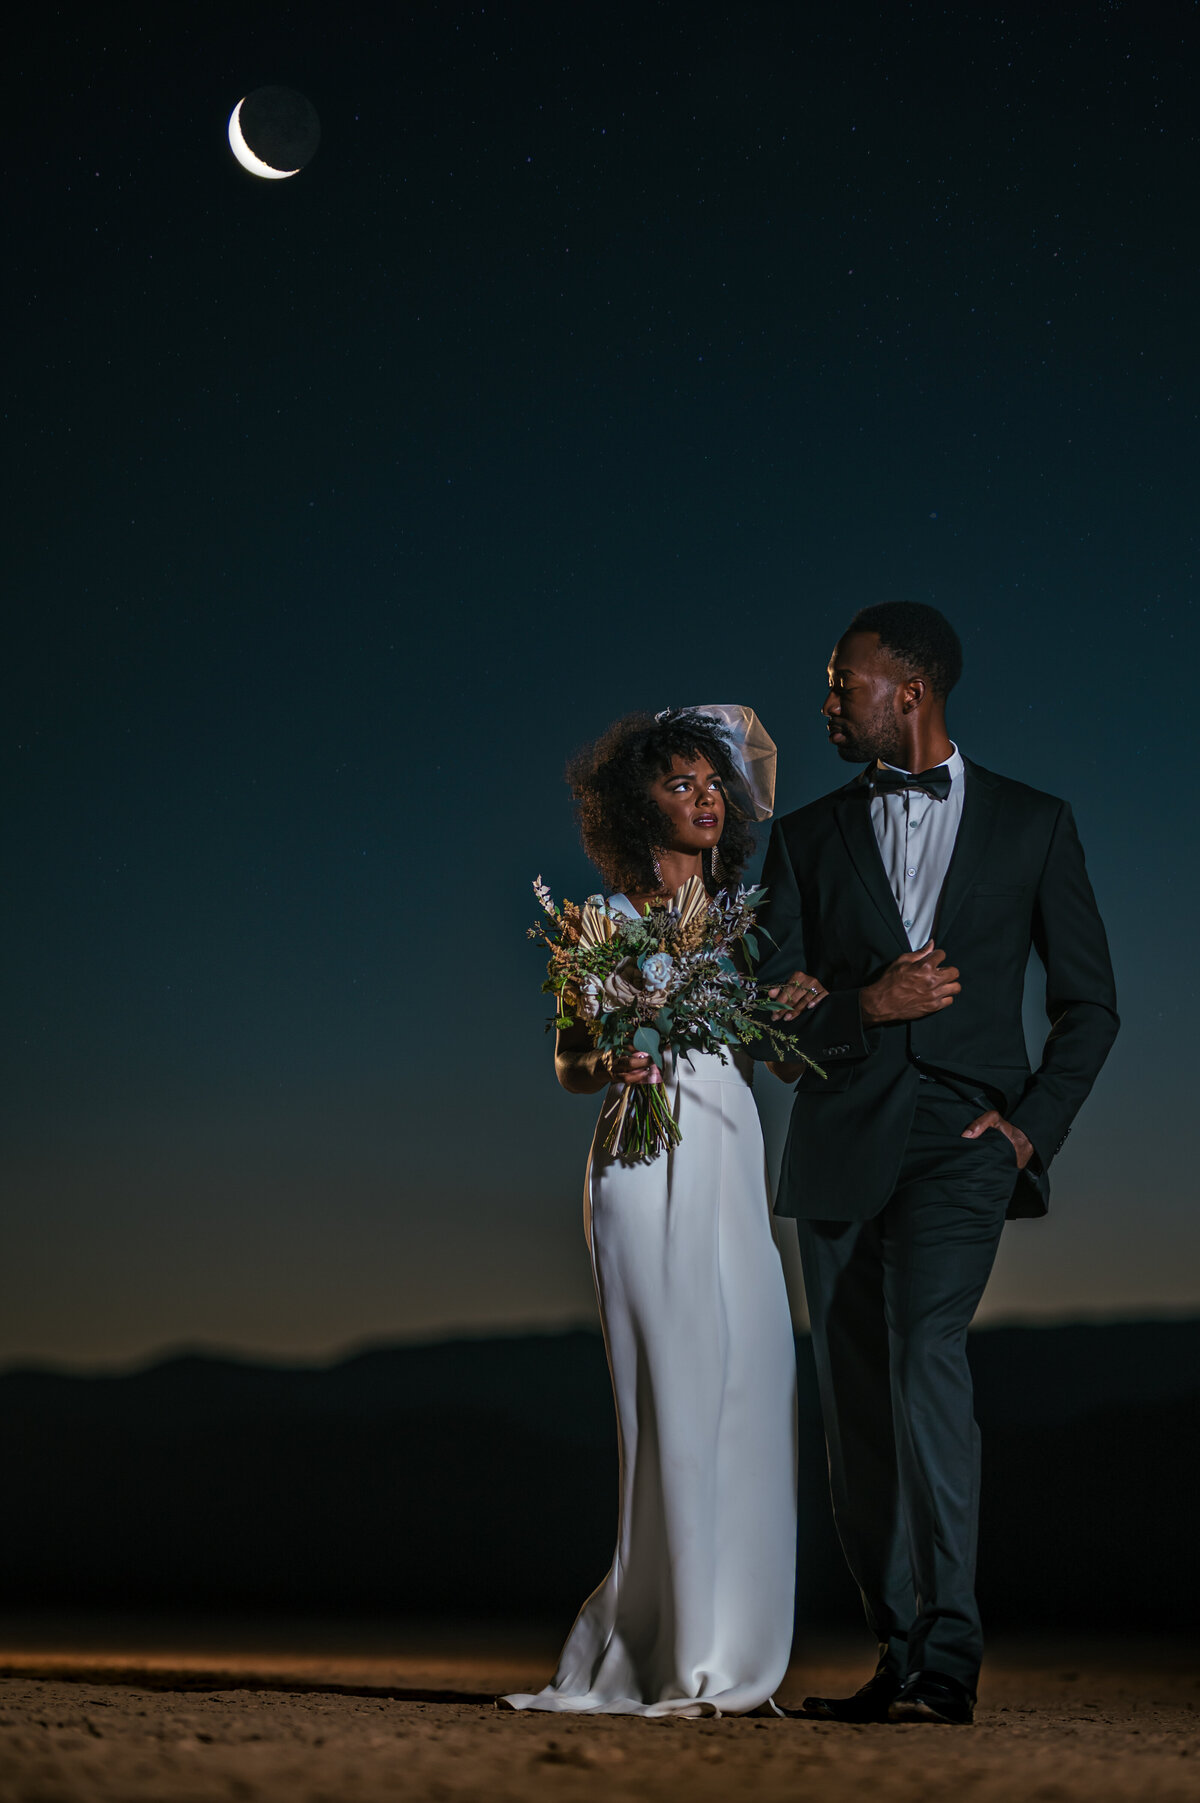 night time wedding  couple looking at each otherWedding by moonlight Dry lake Bed elopement Blue Suit on Groom  flowers by michelle  bride in cream color wedding dress with deep  plunging  neckline mountain skyline  sunset las vegas wedding photographers mk delacy photography